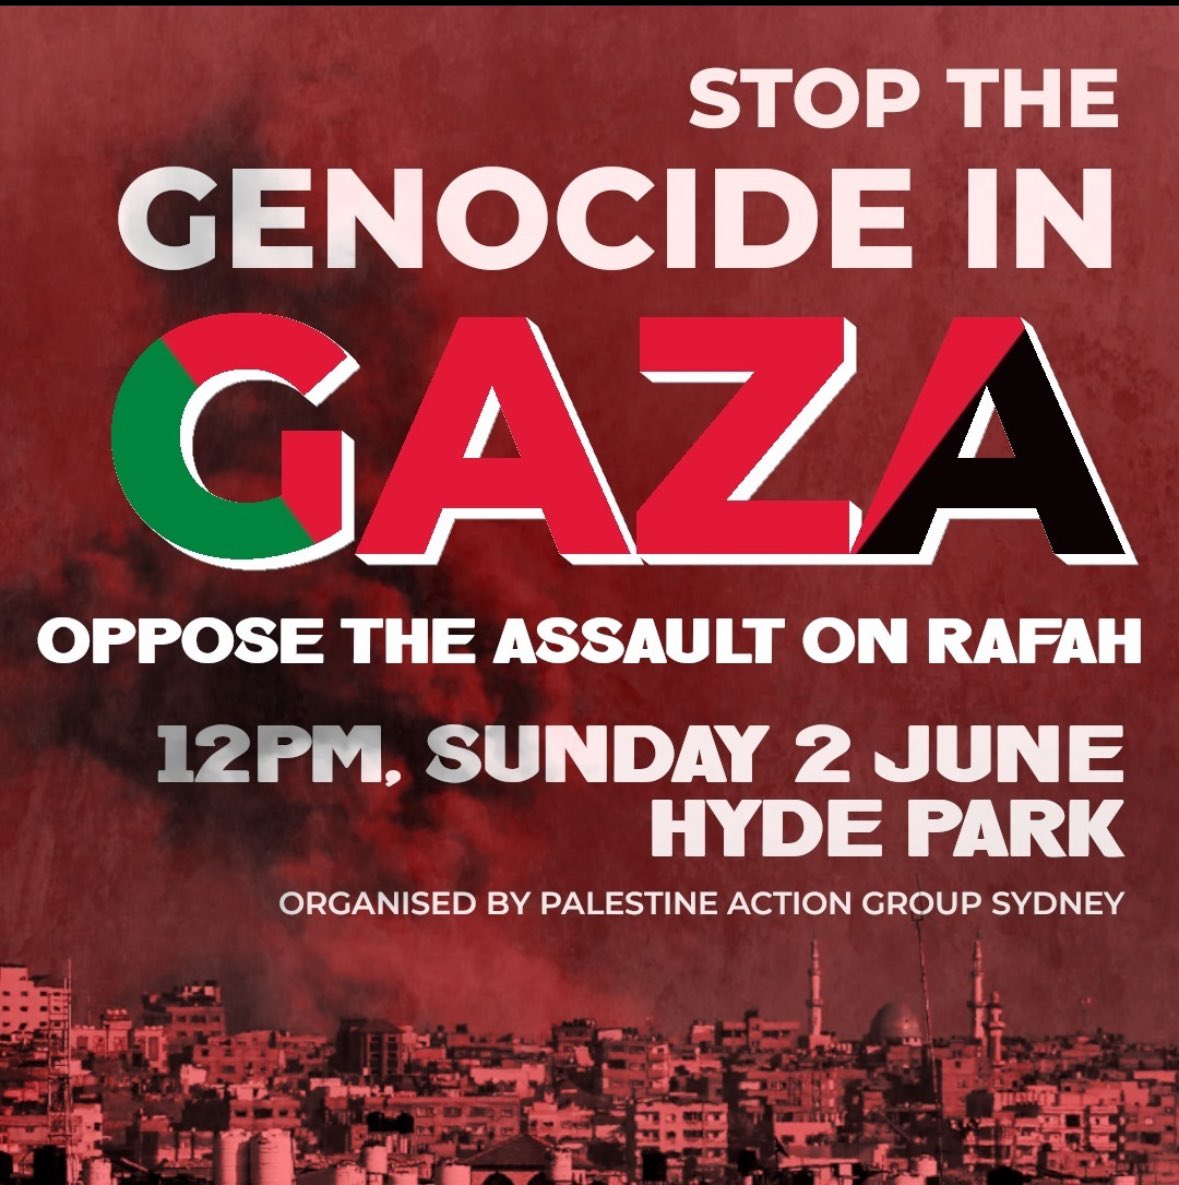 PROTEST **12PM** SUNDAY 2 JUNE Sydney Hyde Park Stop the genocide! Sanction Israel now! This will be a big protest. If you have never been to one, or haven't been in a while this is the week to join us on the streets. Your voice matters. Please. We cannot see any more starving